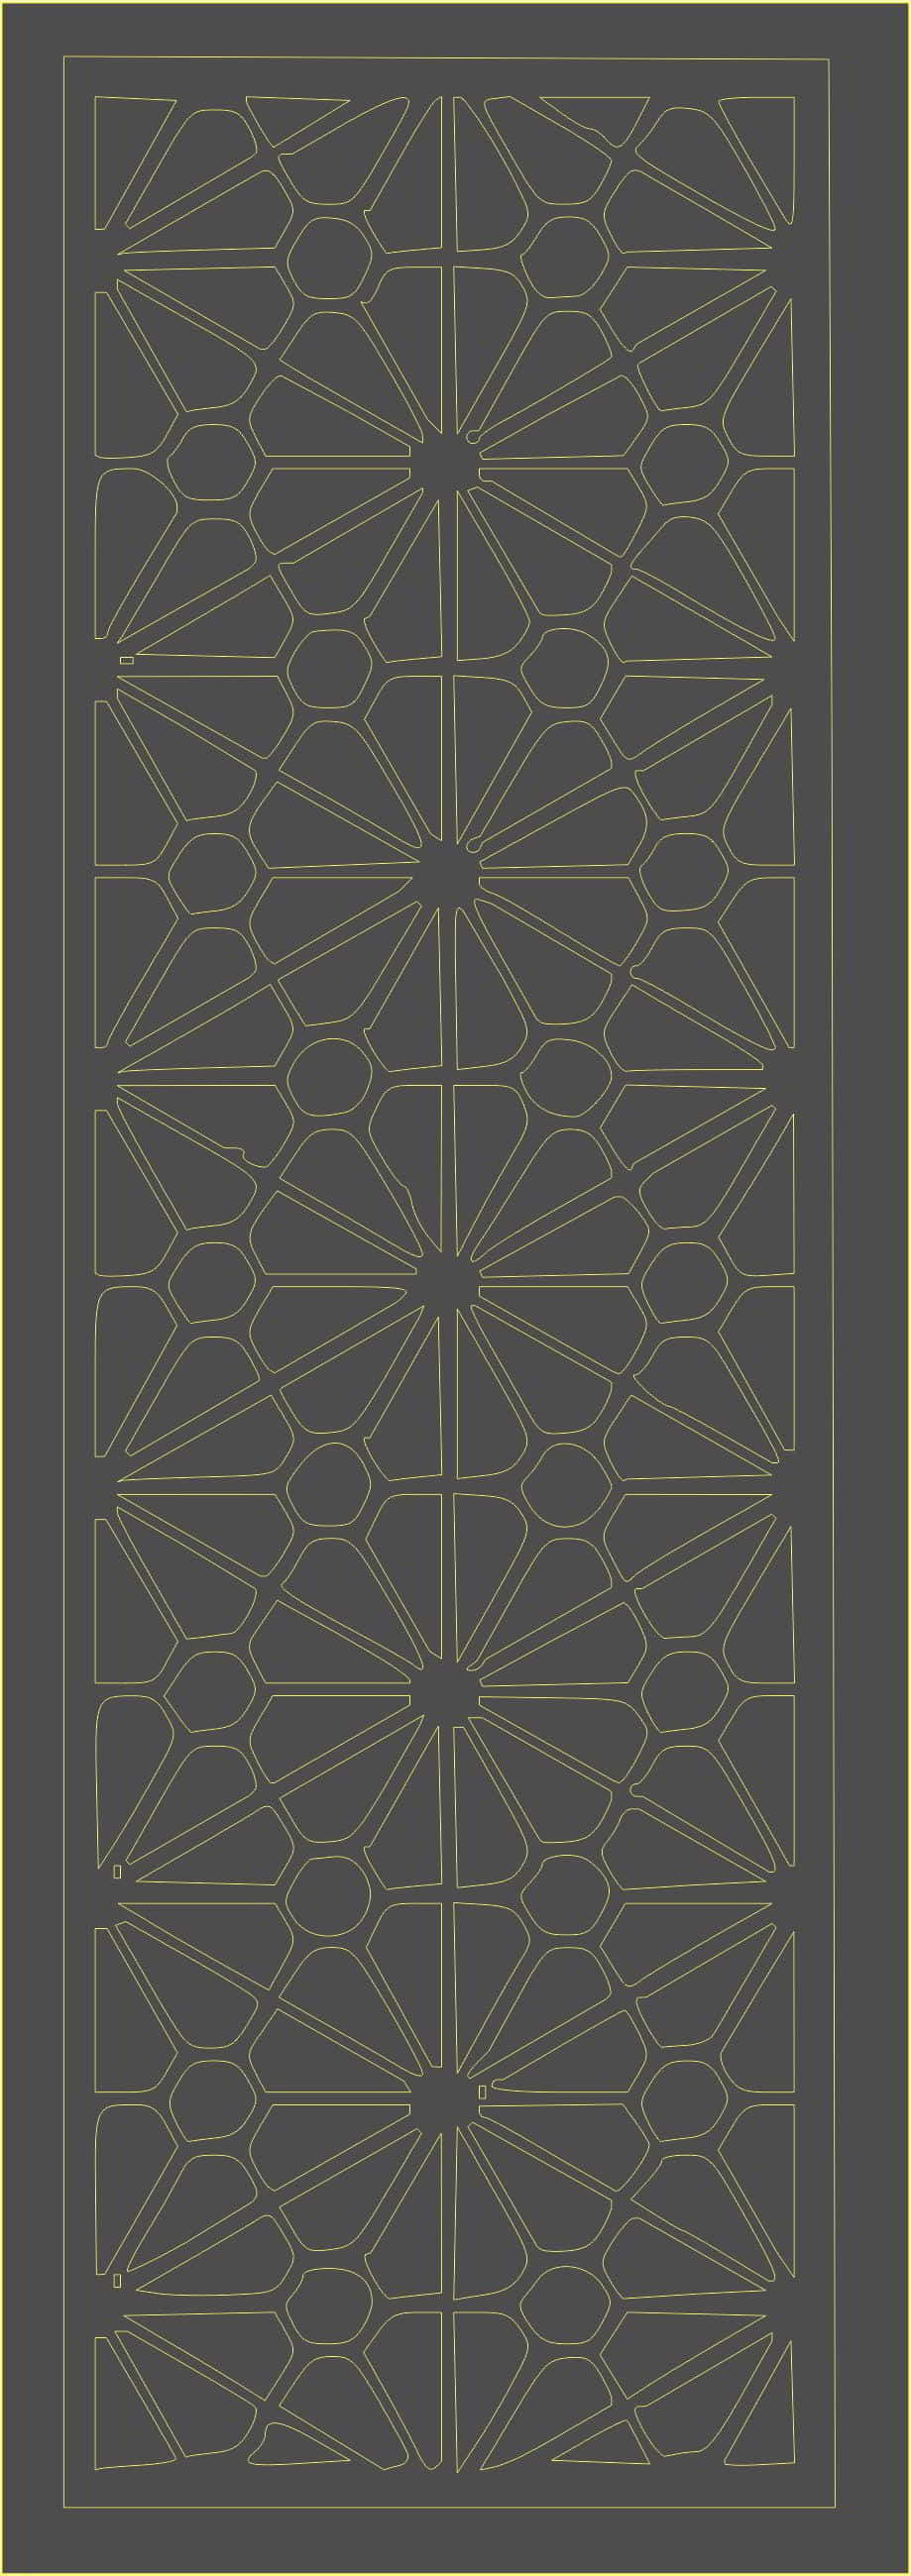 Room Divider Pattern Screen Free Vector File